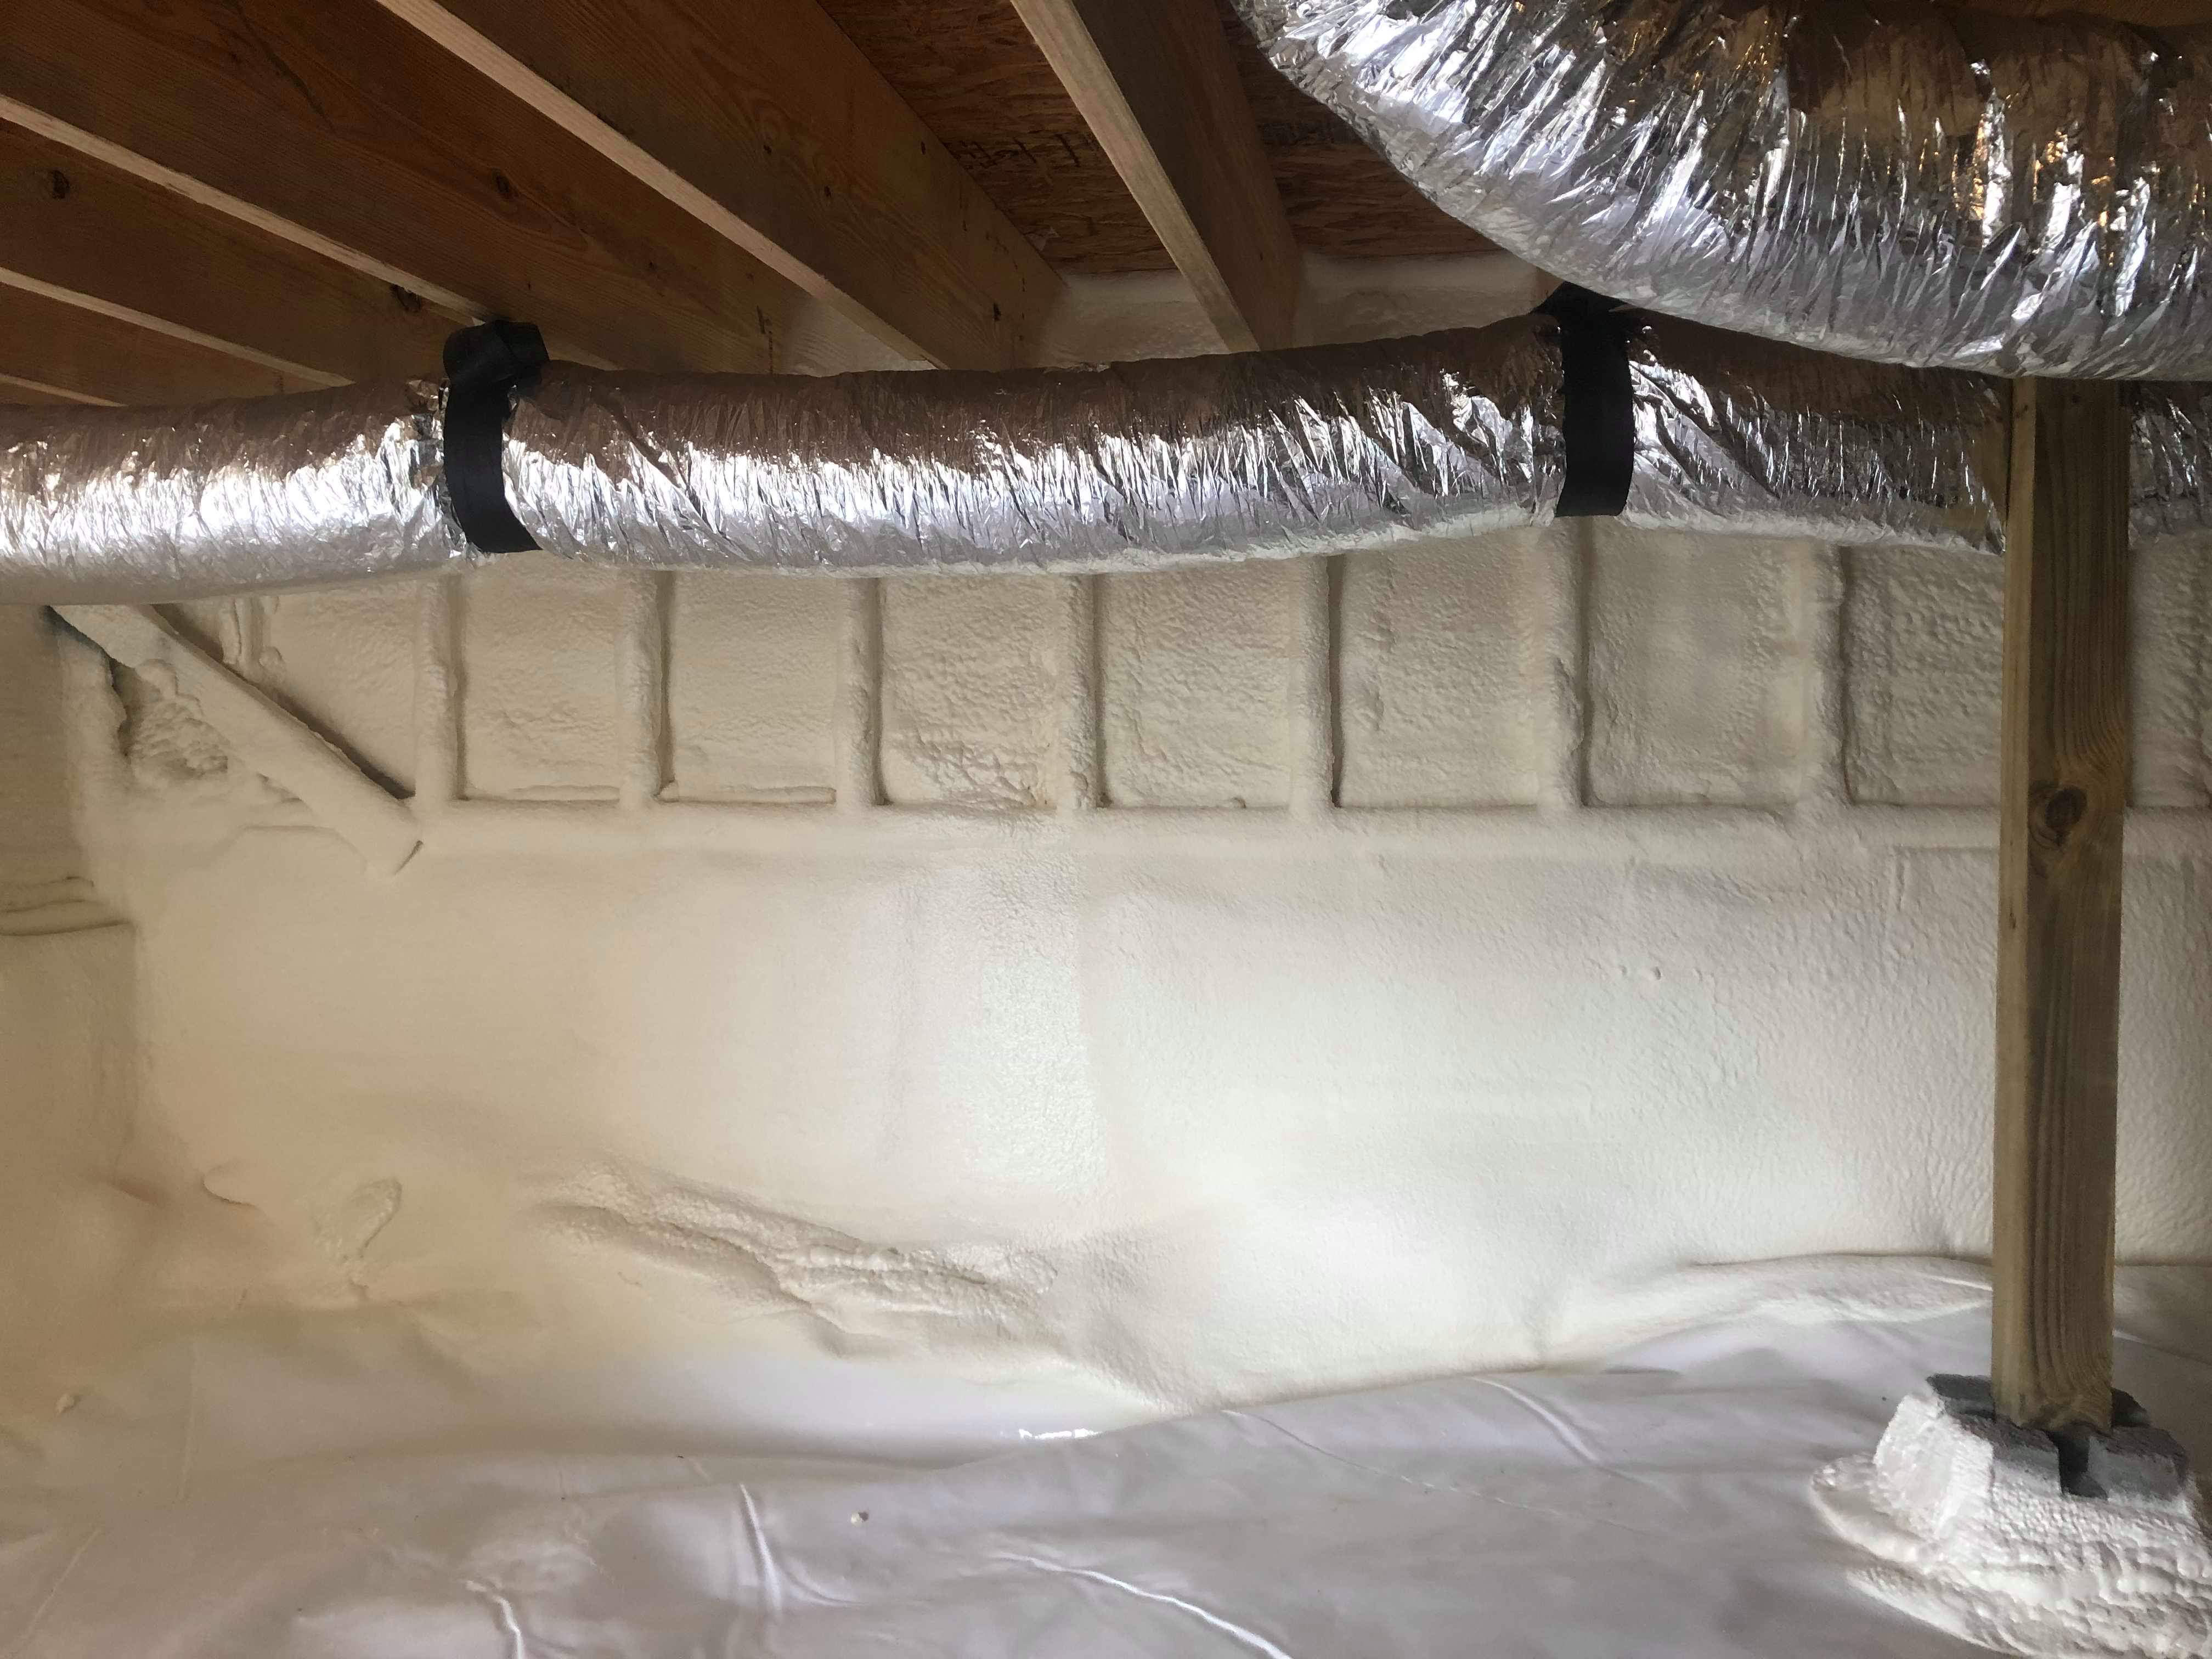 Crawl space with antimicrobial liner and insulation